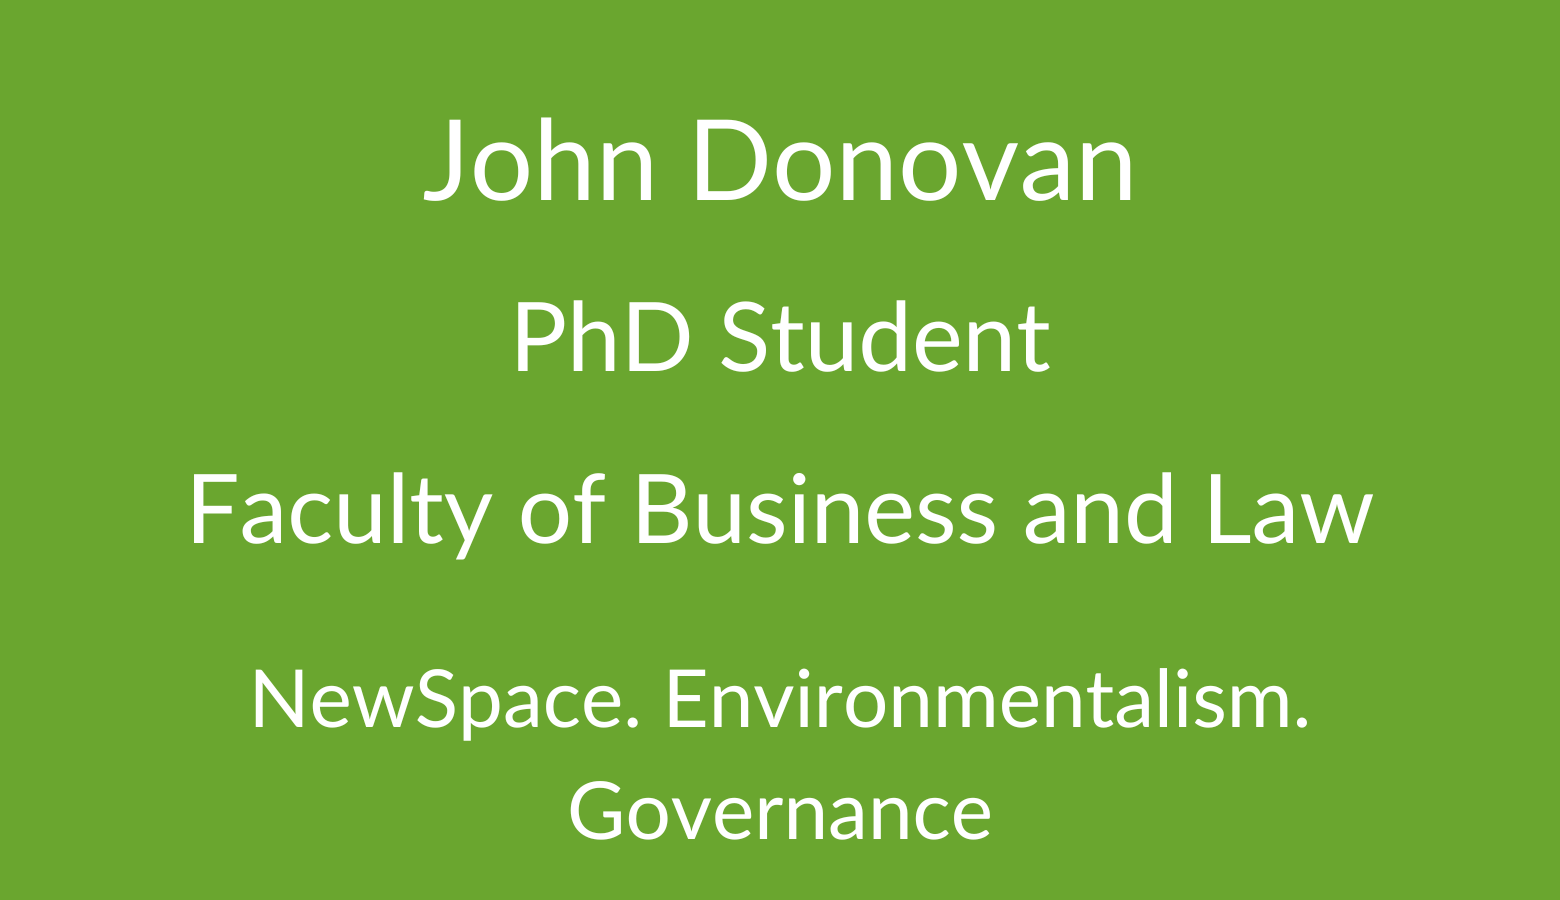 John Donovan. PhD Student. Faculty of Business and Law. NewSpace. Environmentalism